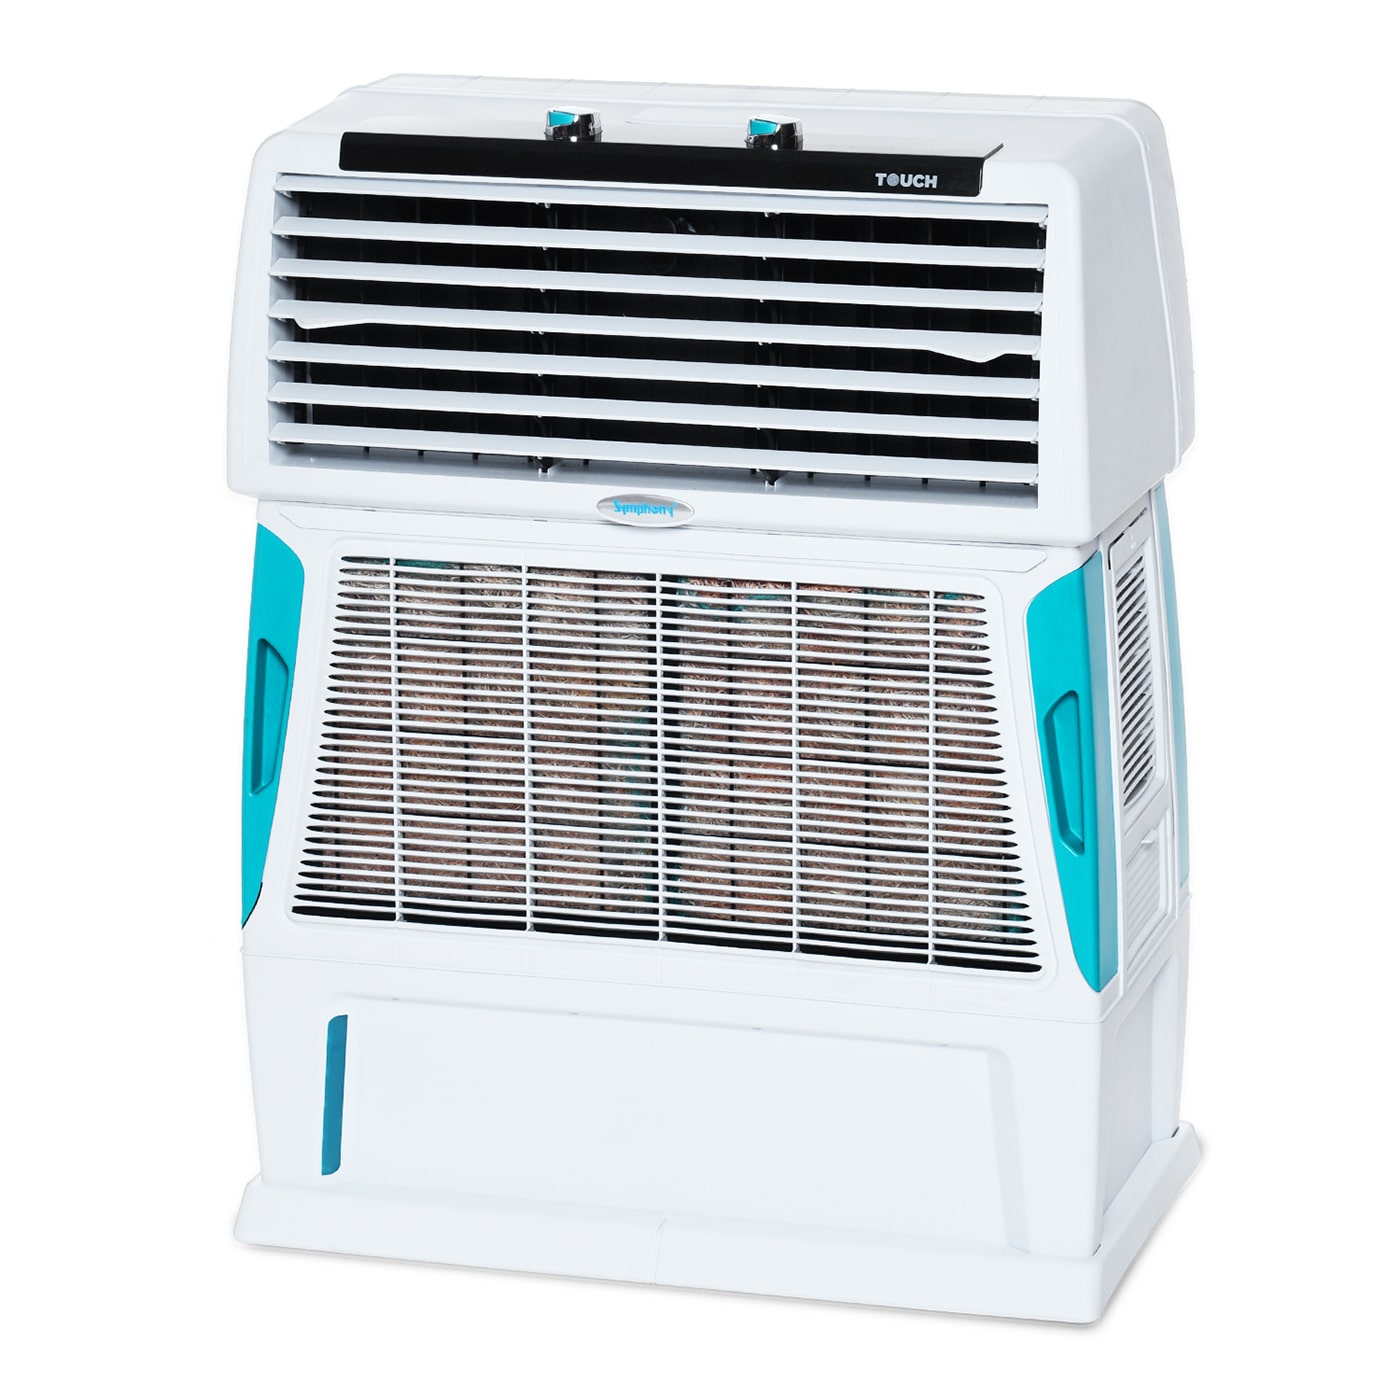 Touch 55 air cooler: Beat the heat in style